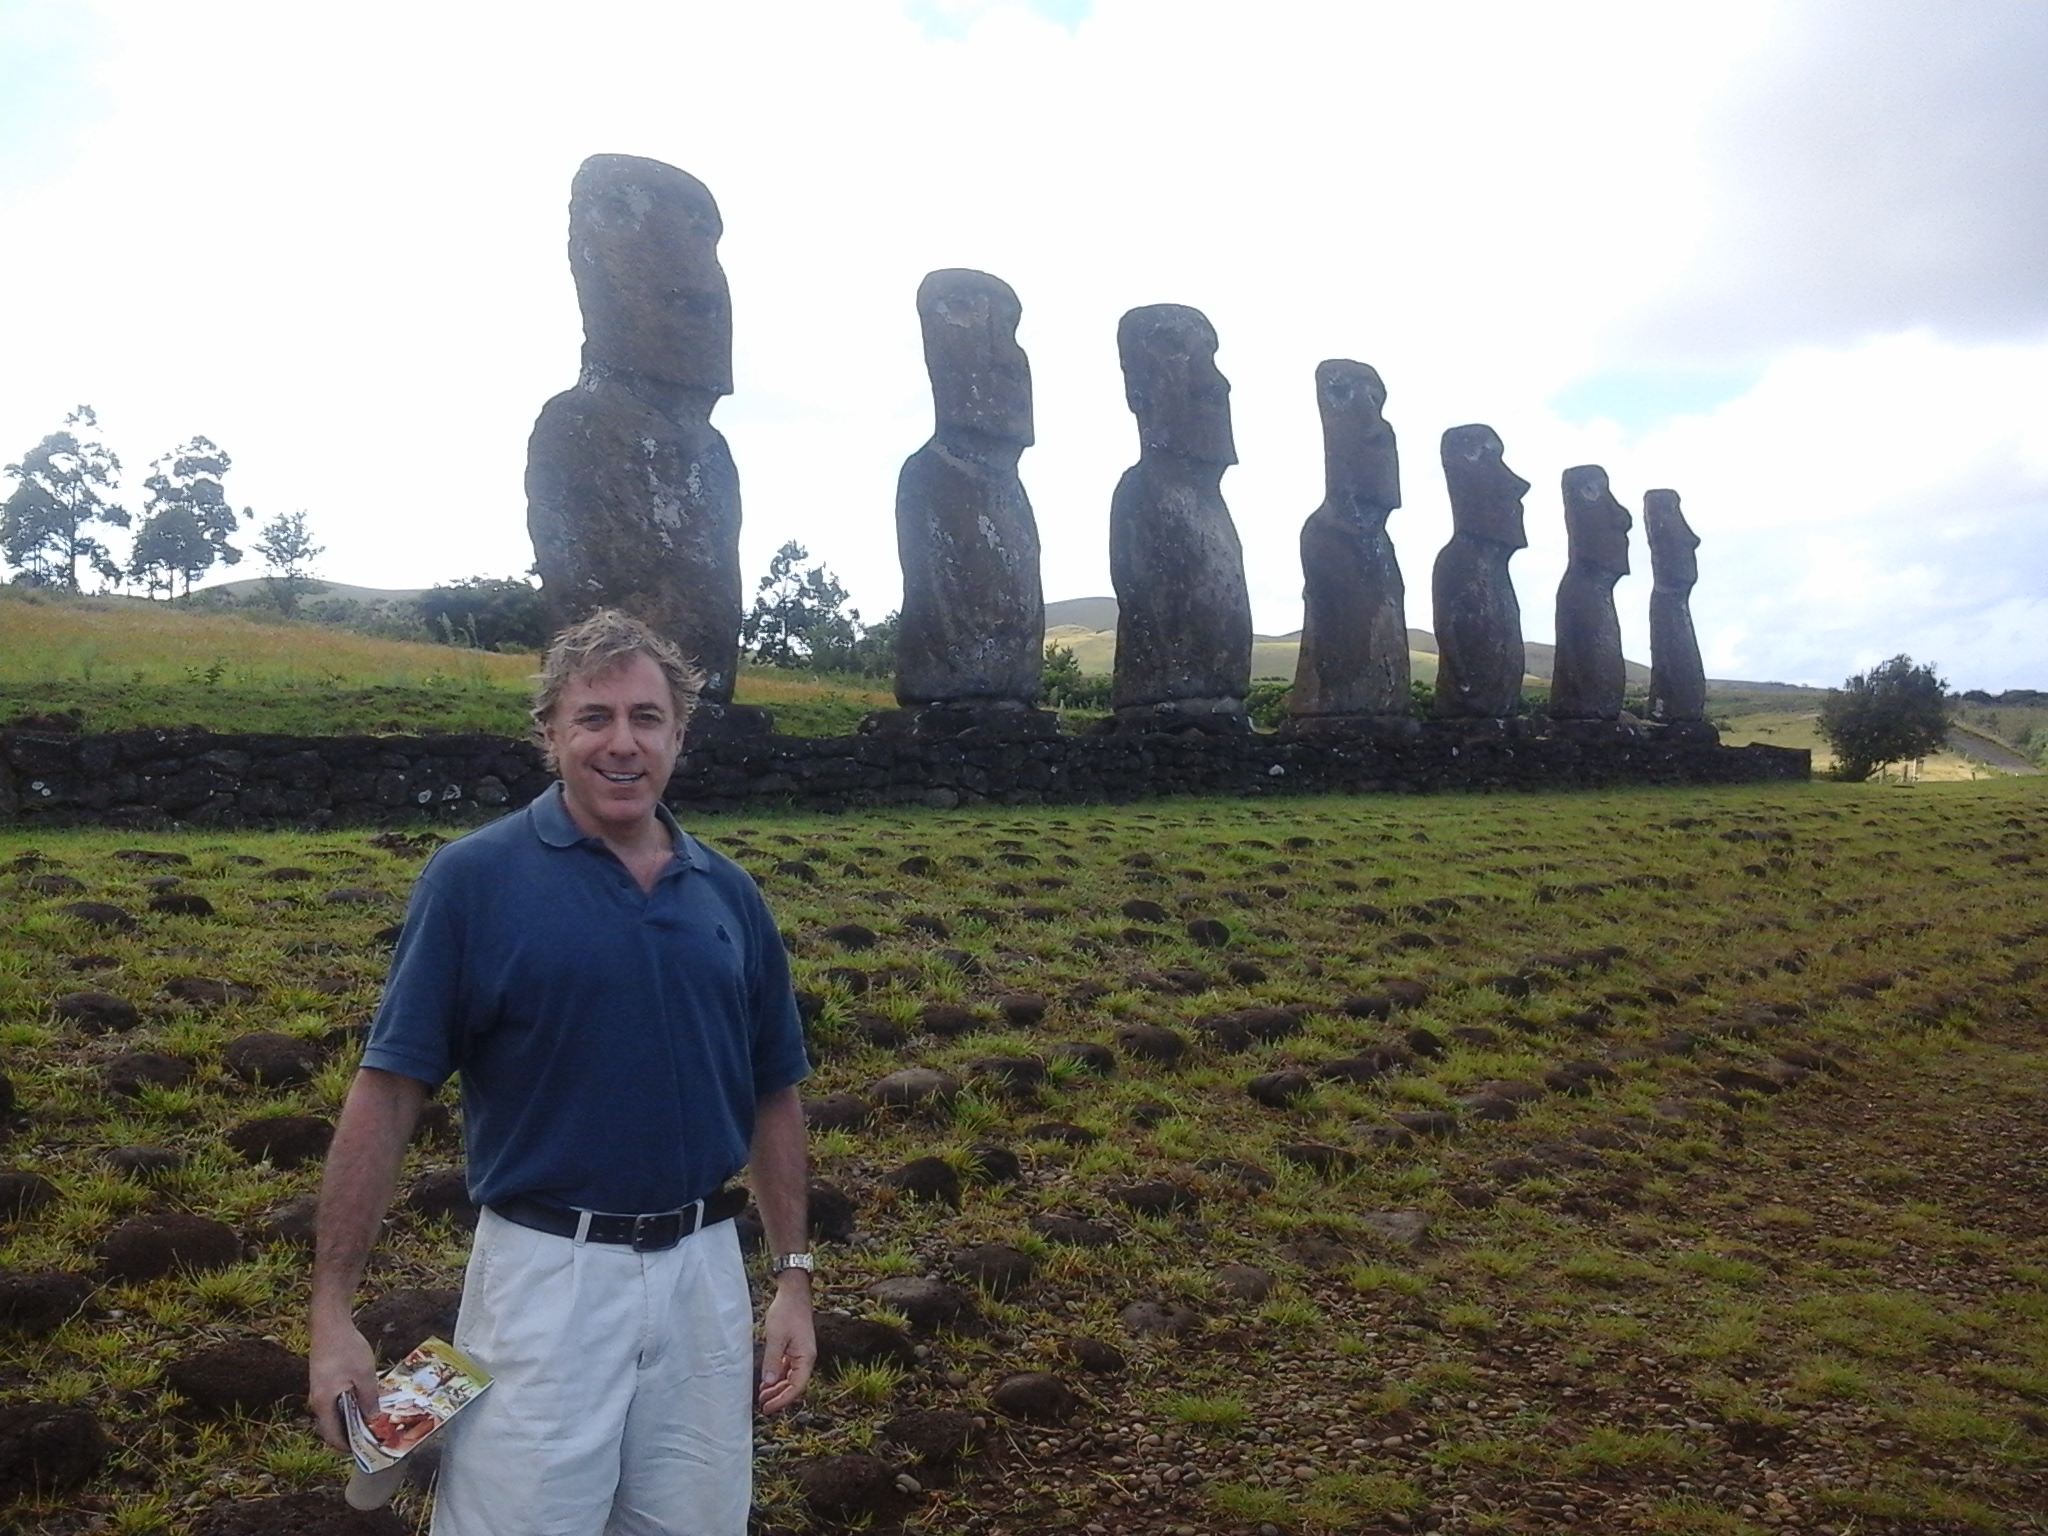 March 2014, Burton Traveled to Chile, Easter Island, Henderson & Pitcairn Islands, UK & Fr. Polynesia to Create & Direct an Original Musical, again Aboard The WORLD